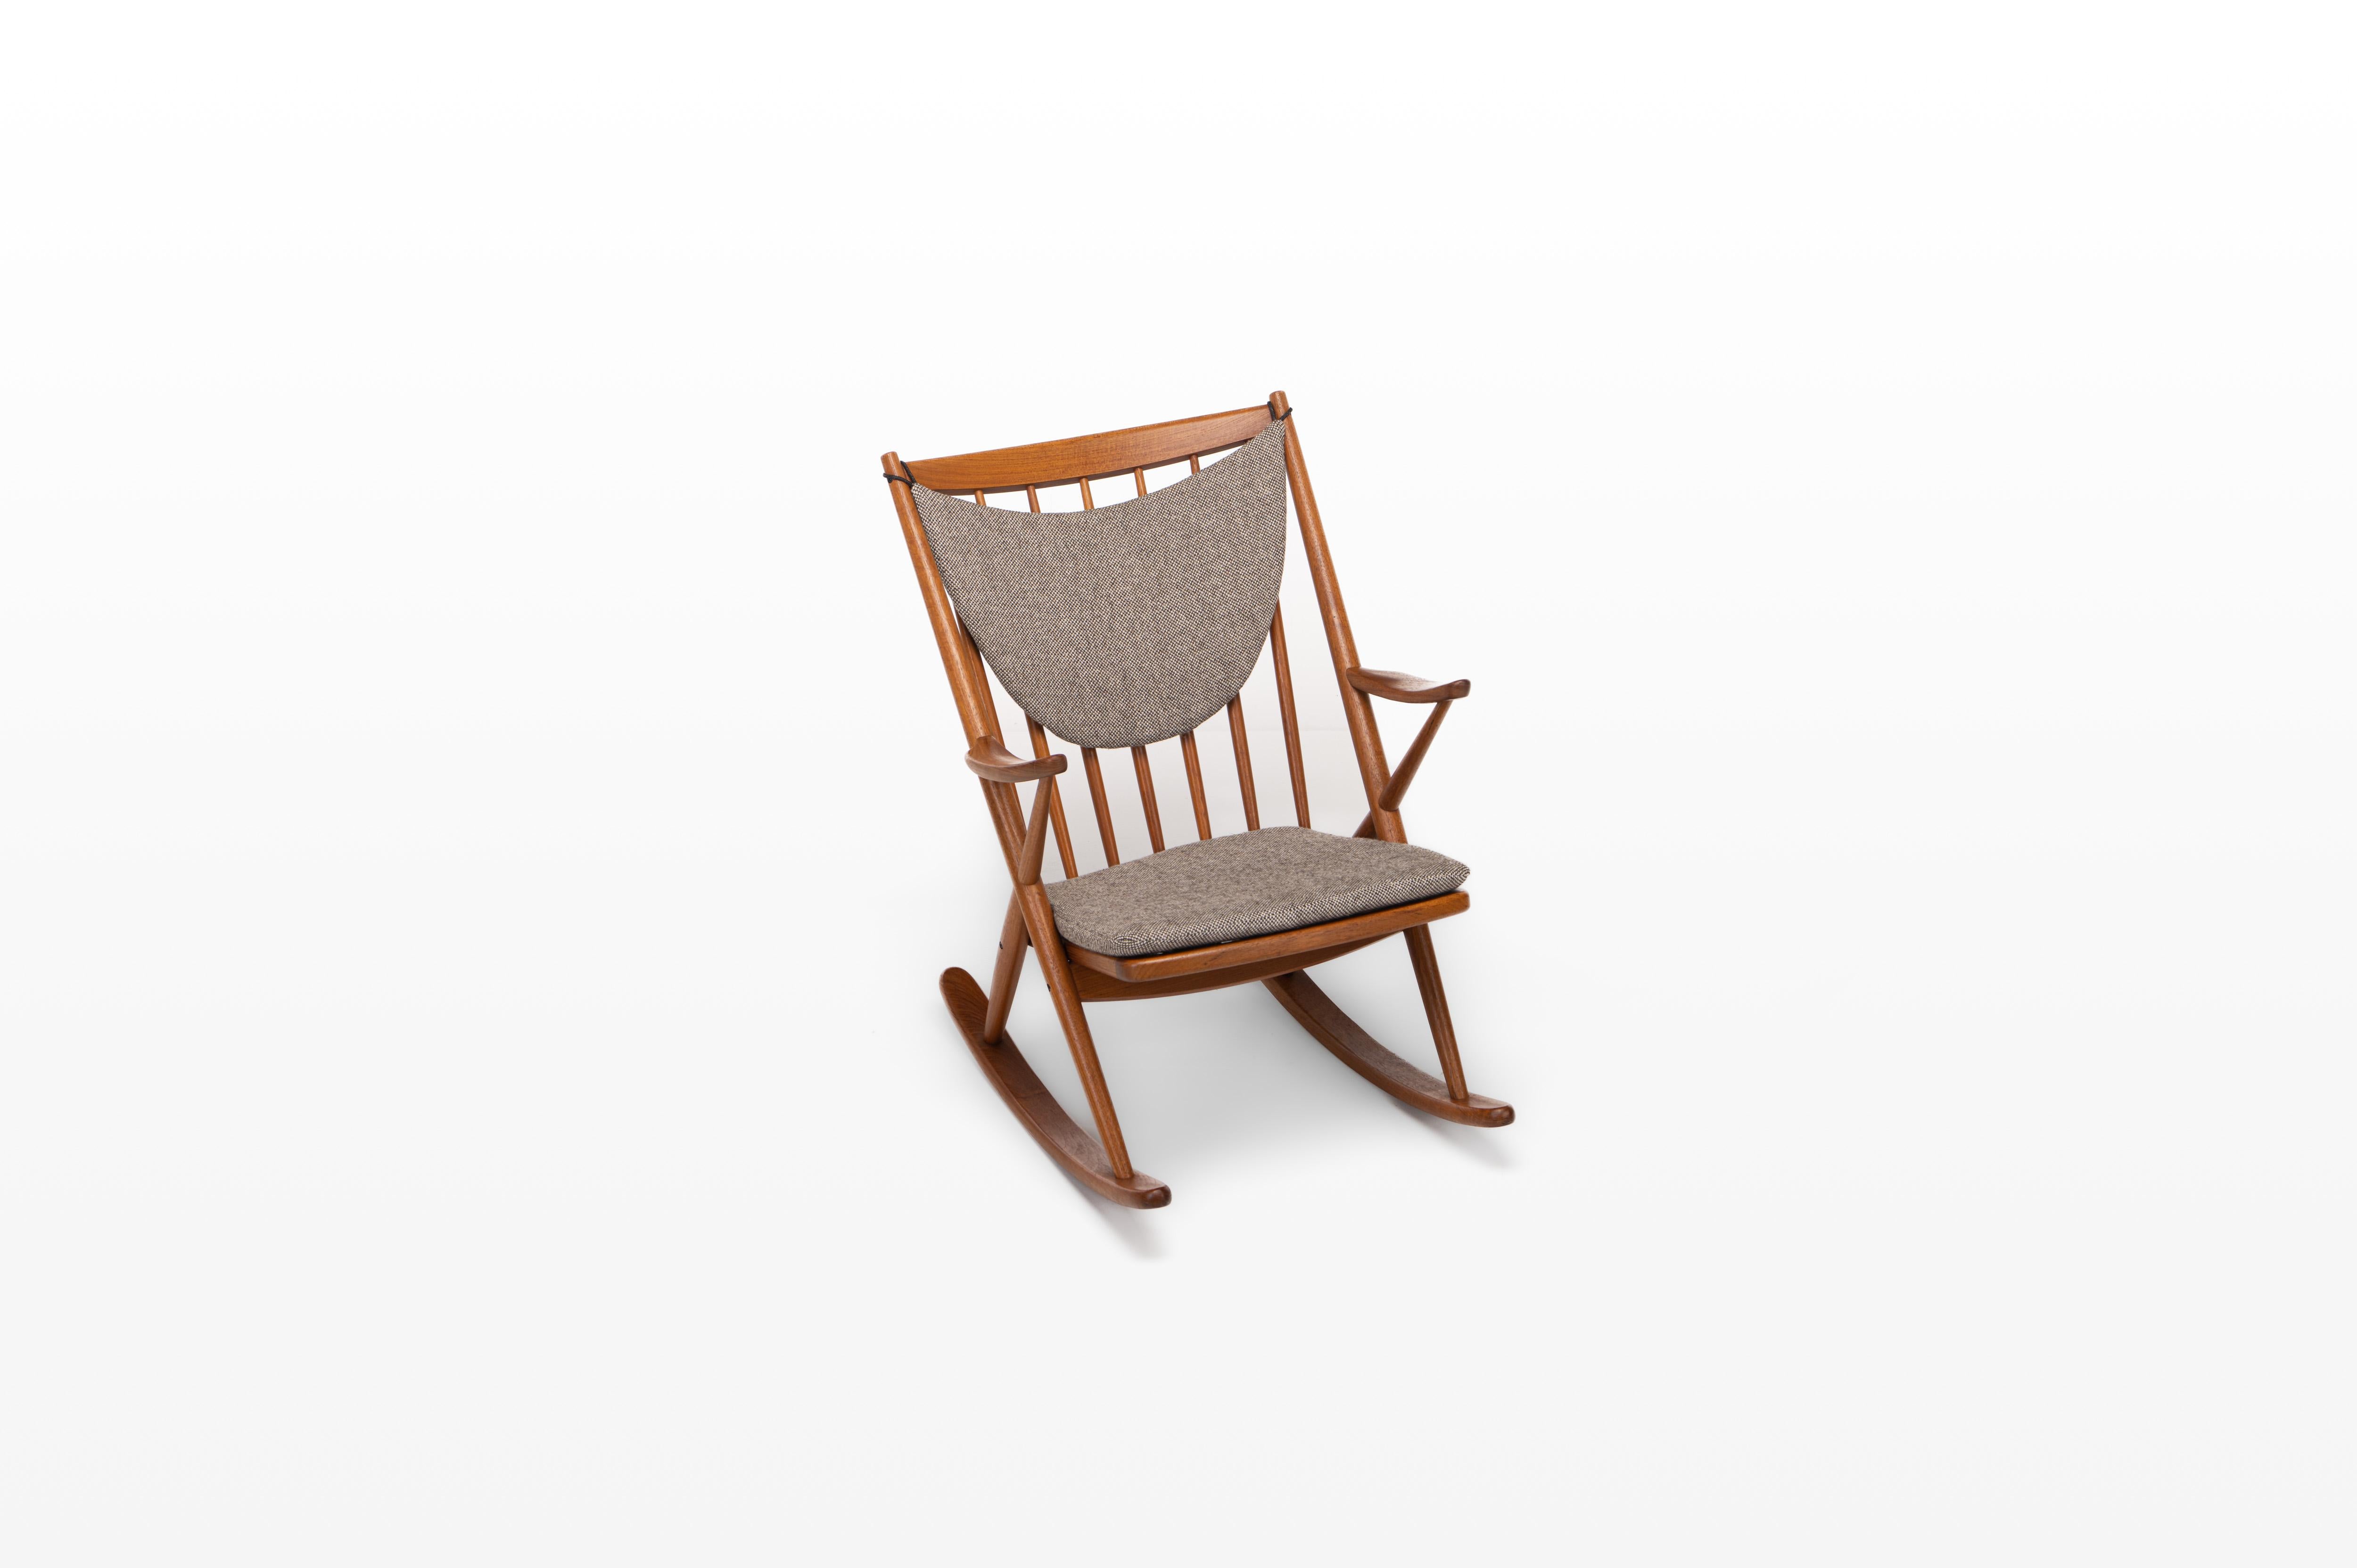 Vintage rocking chair designed by Frank Reenskaug for Bramin in the 1960s. The chair has a teak and has the original fabric.